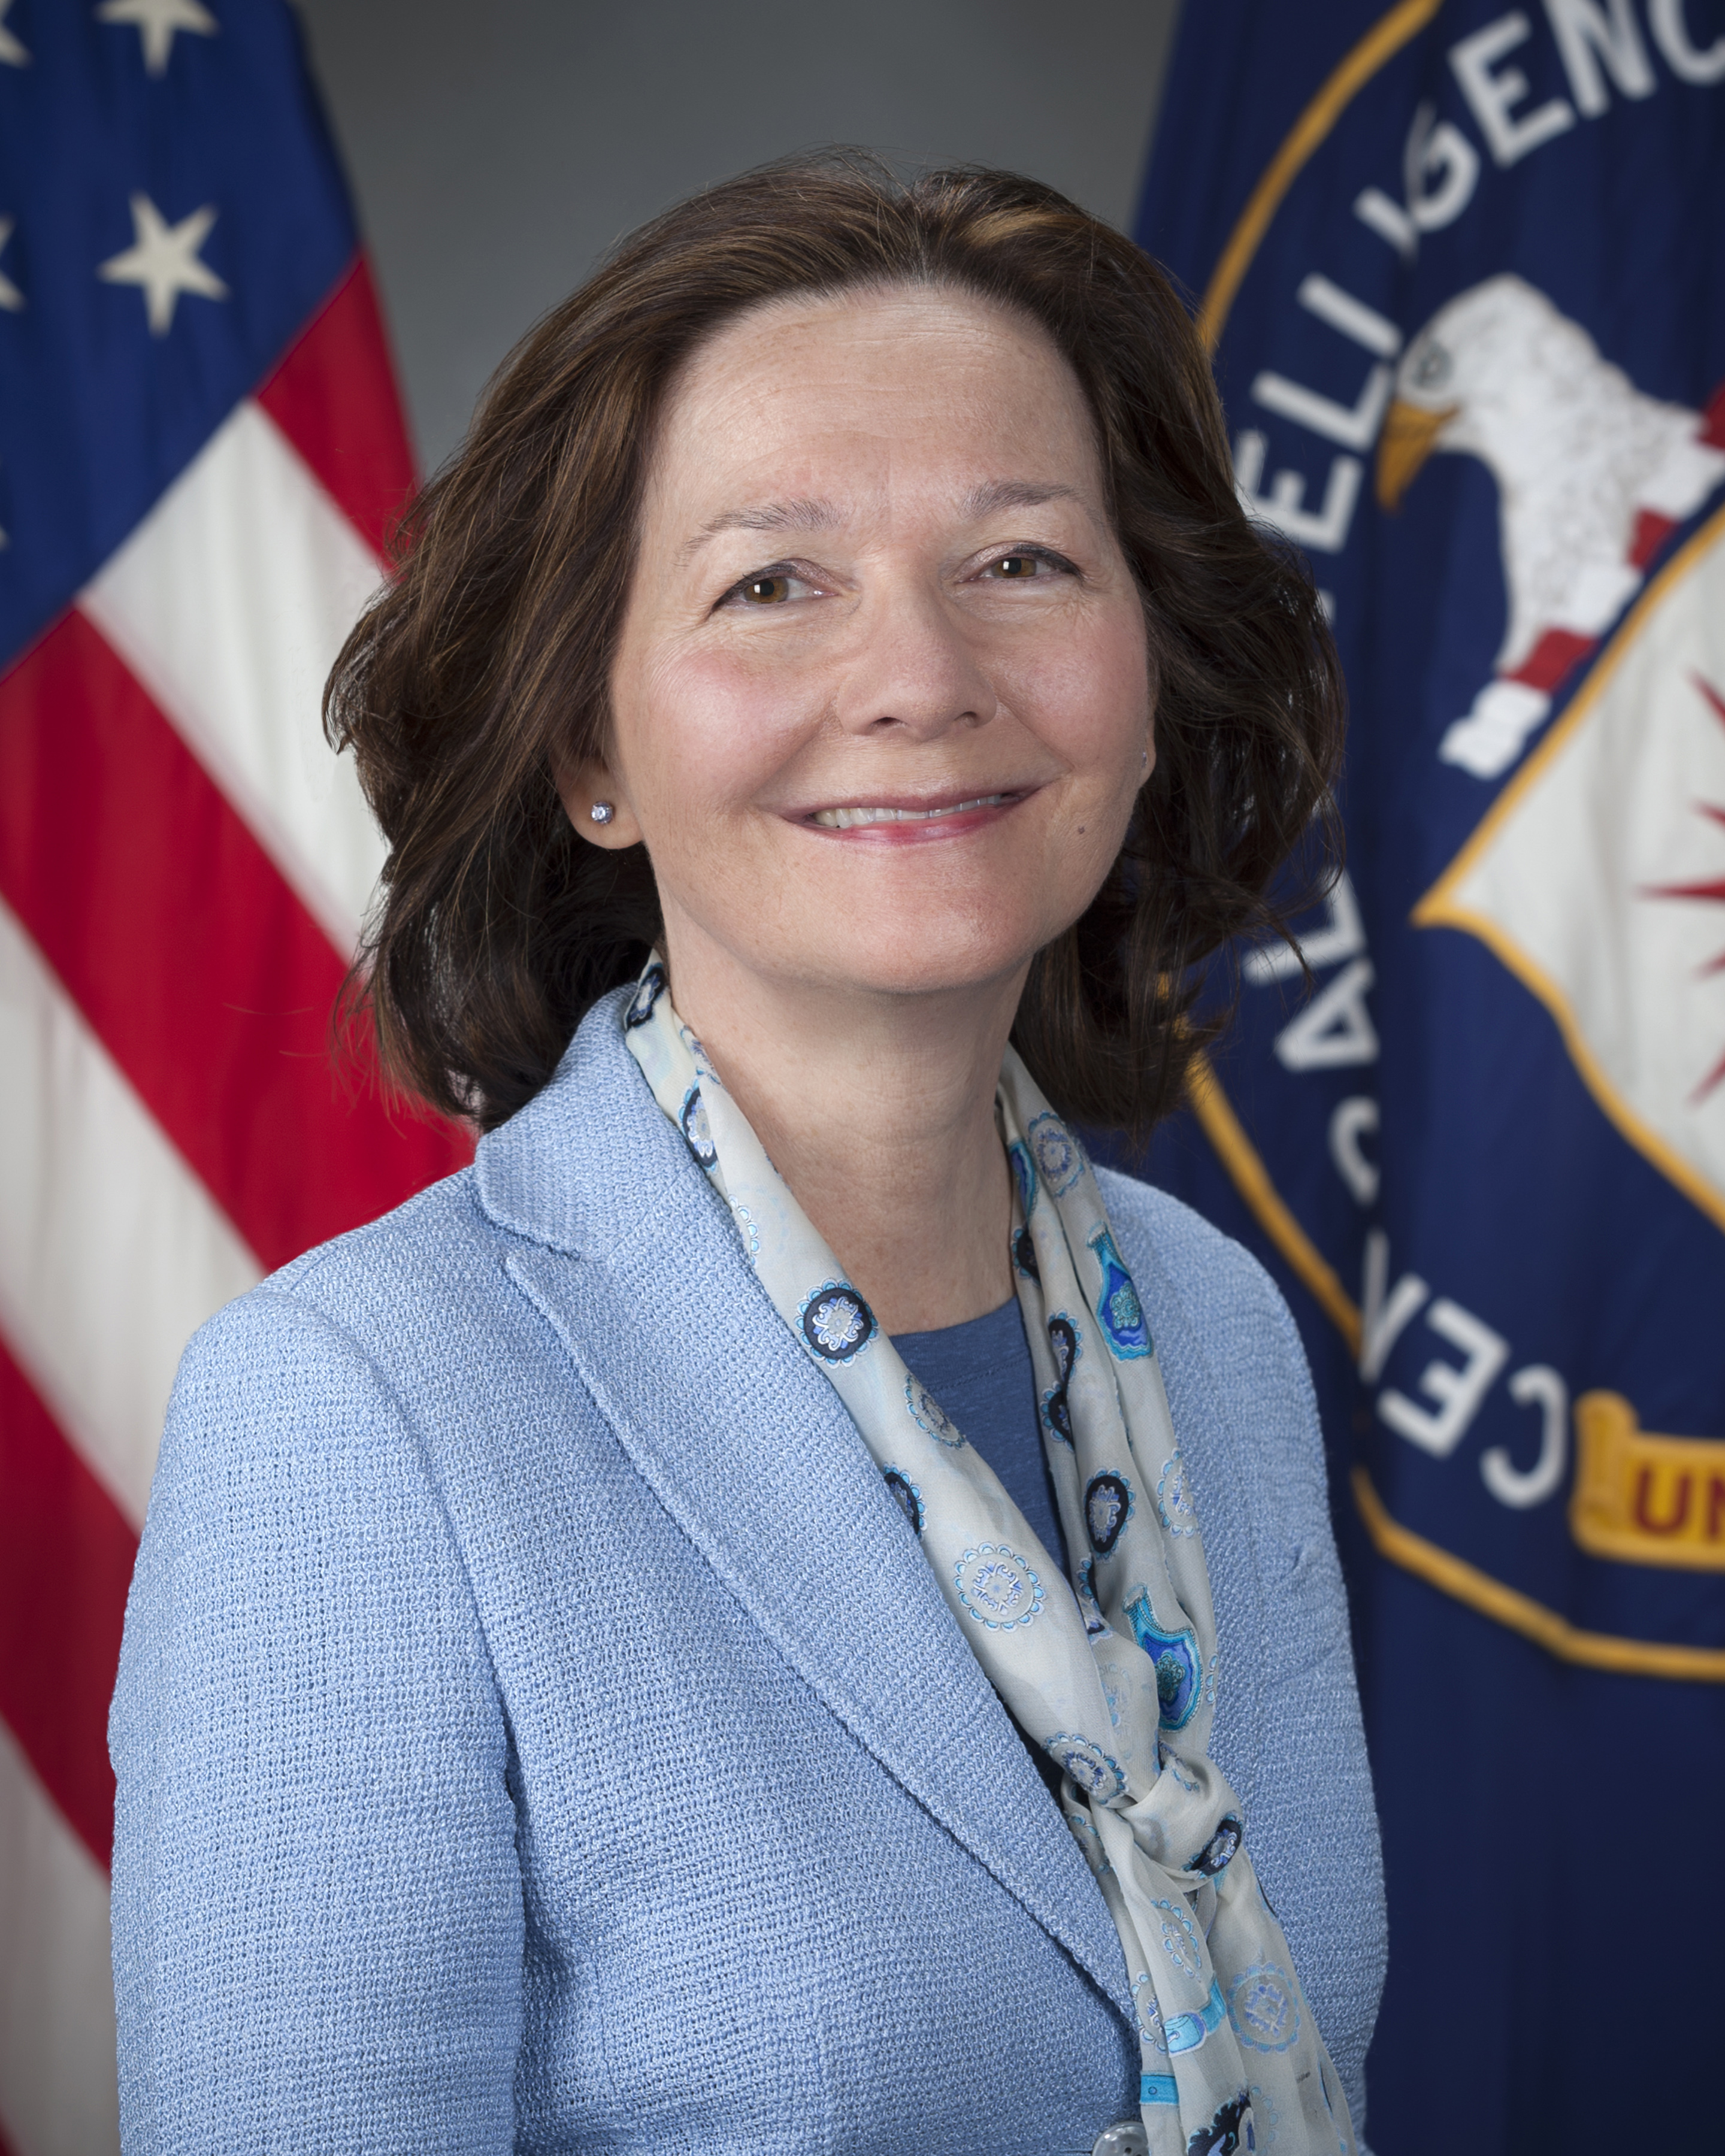 Gina Haspel, President Trump’s nominee to head the CIA, has just been confirmed by the Senate despite her role in a Bush-era torture program.